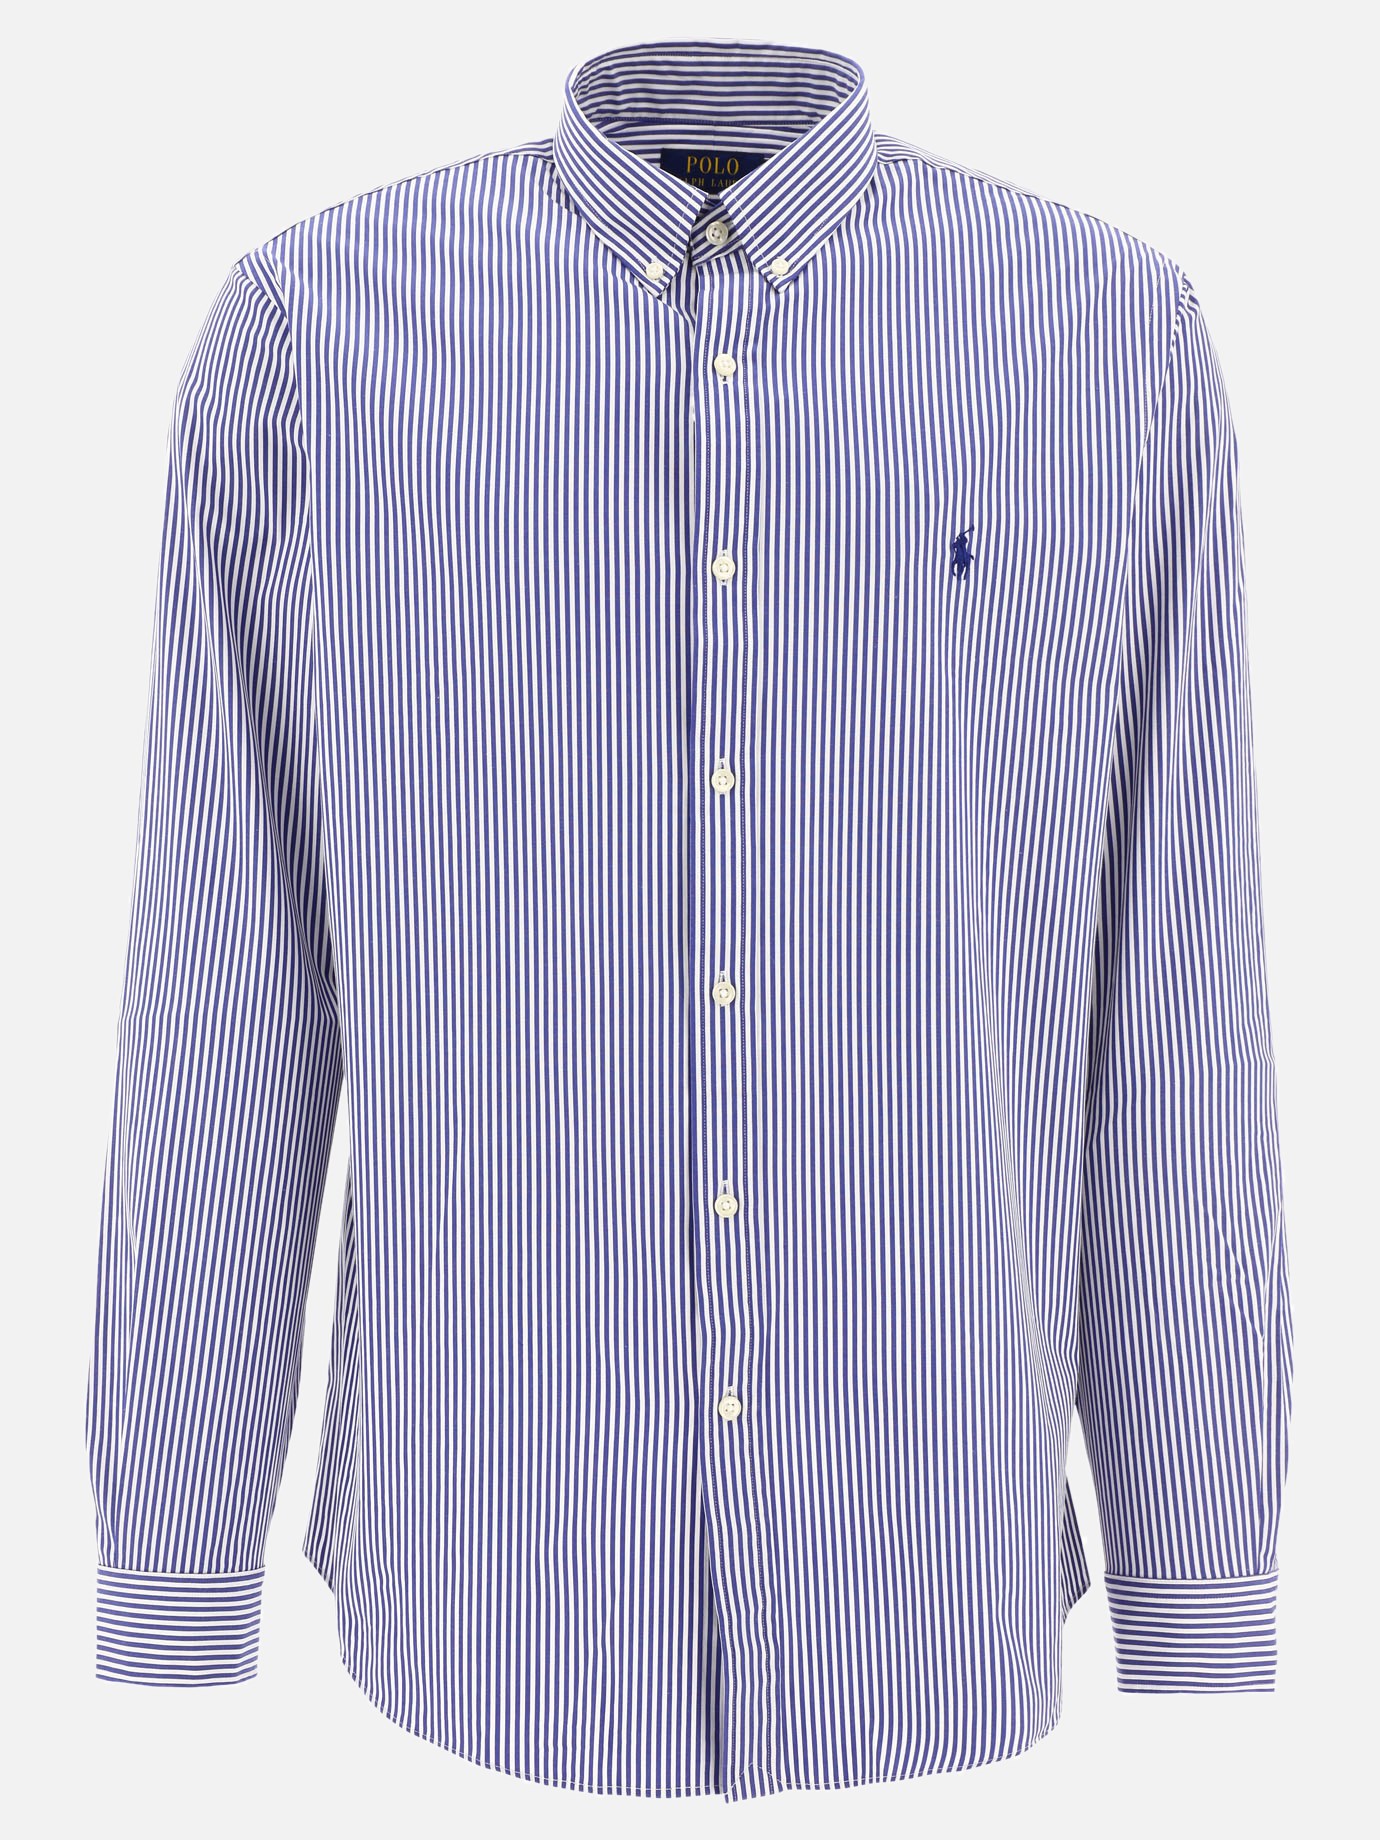 Camicia a righe  Pony by Polo Ralph Lauren - 1